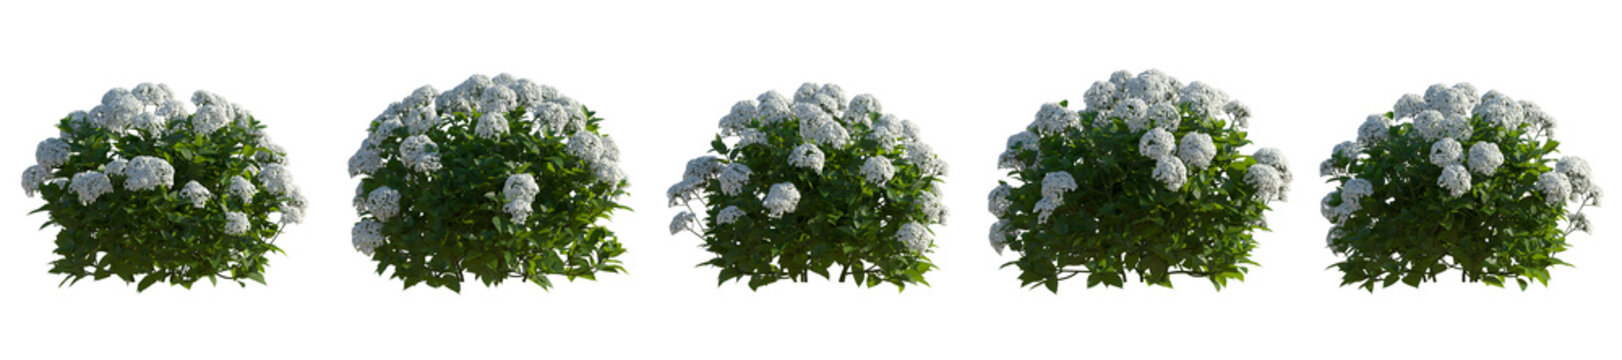 Set of hydrangea arborescens annabelle bush shrub isolated png on a transparent background right lighting perfectly cutout
